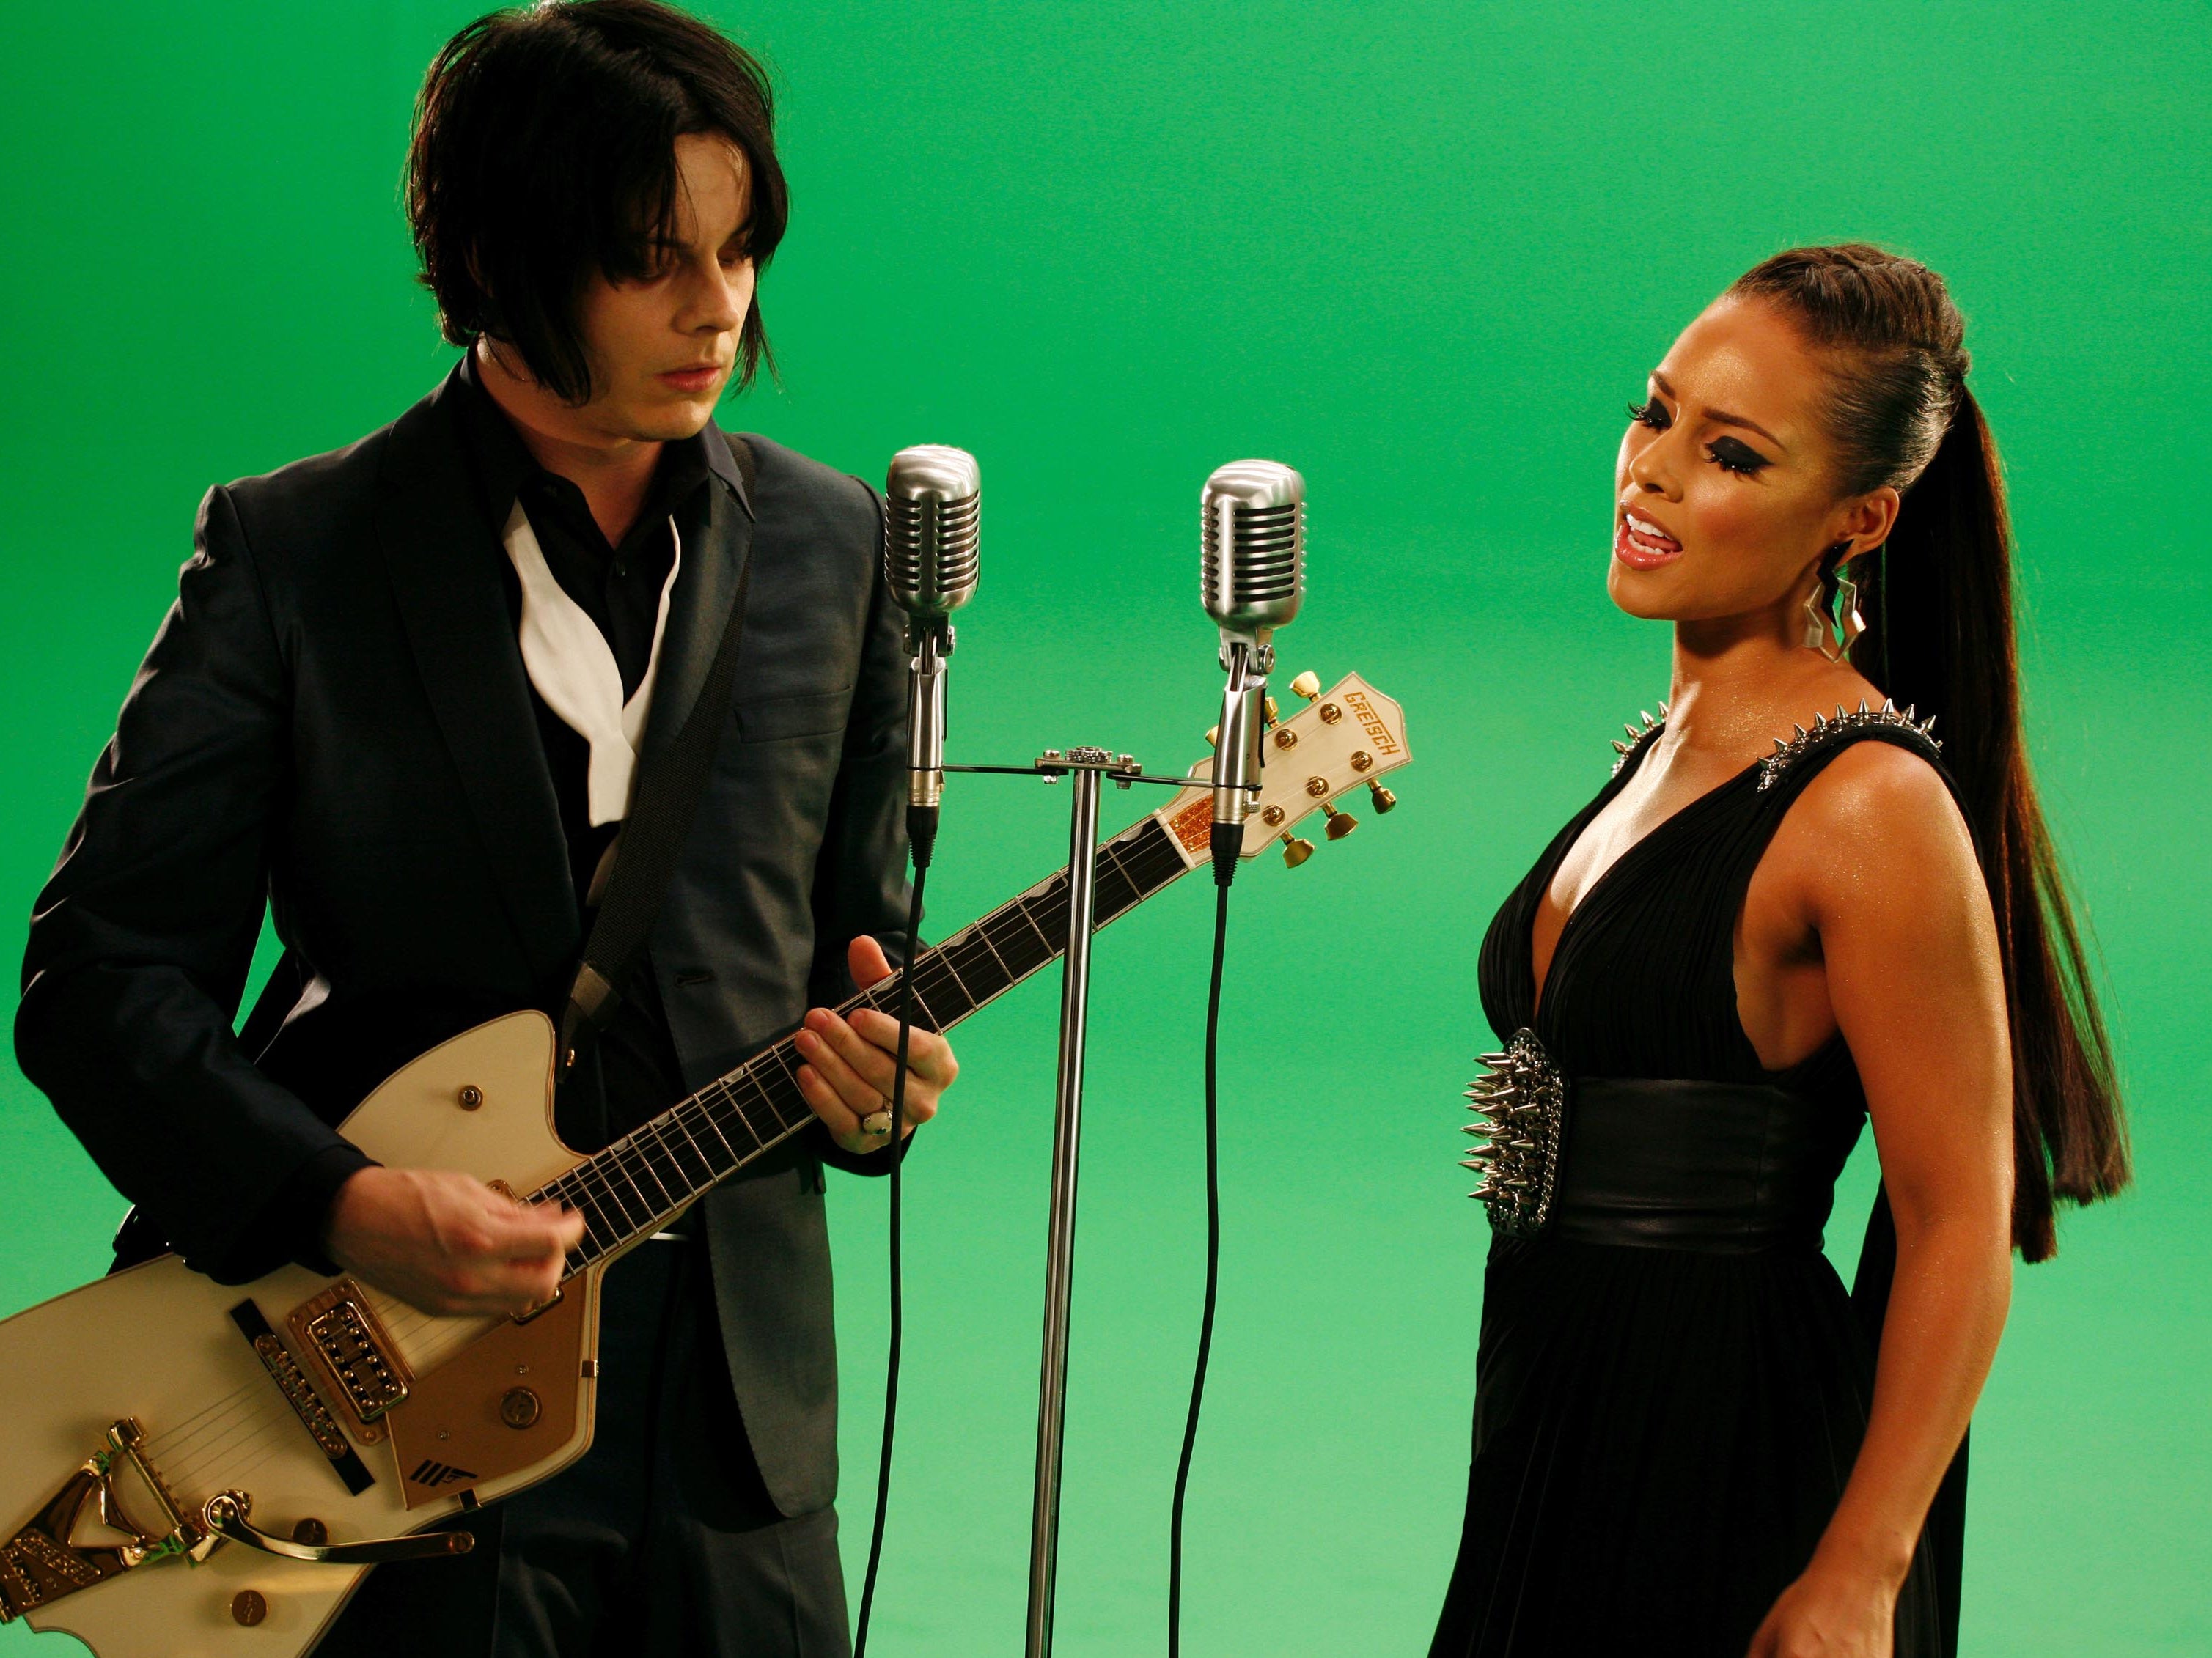 Jack White and Alicia Keys perform ‘Another Way to Die'